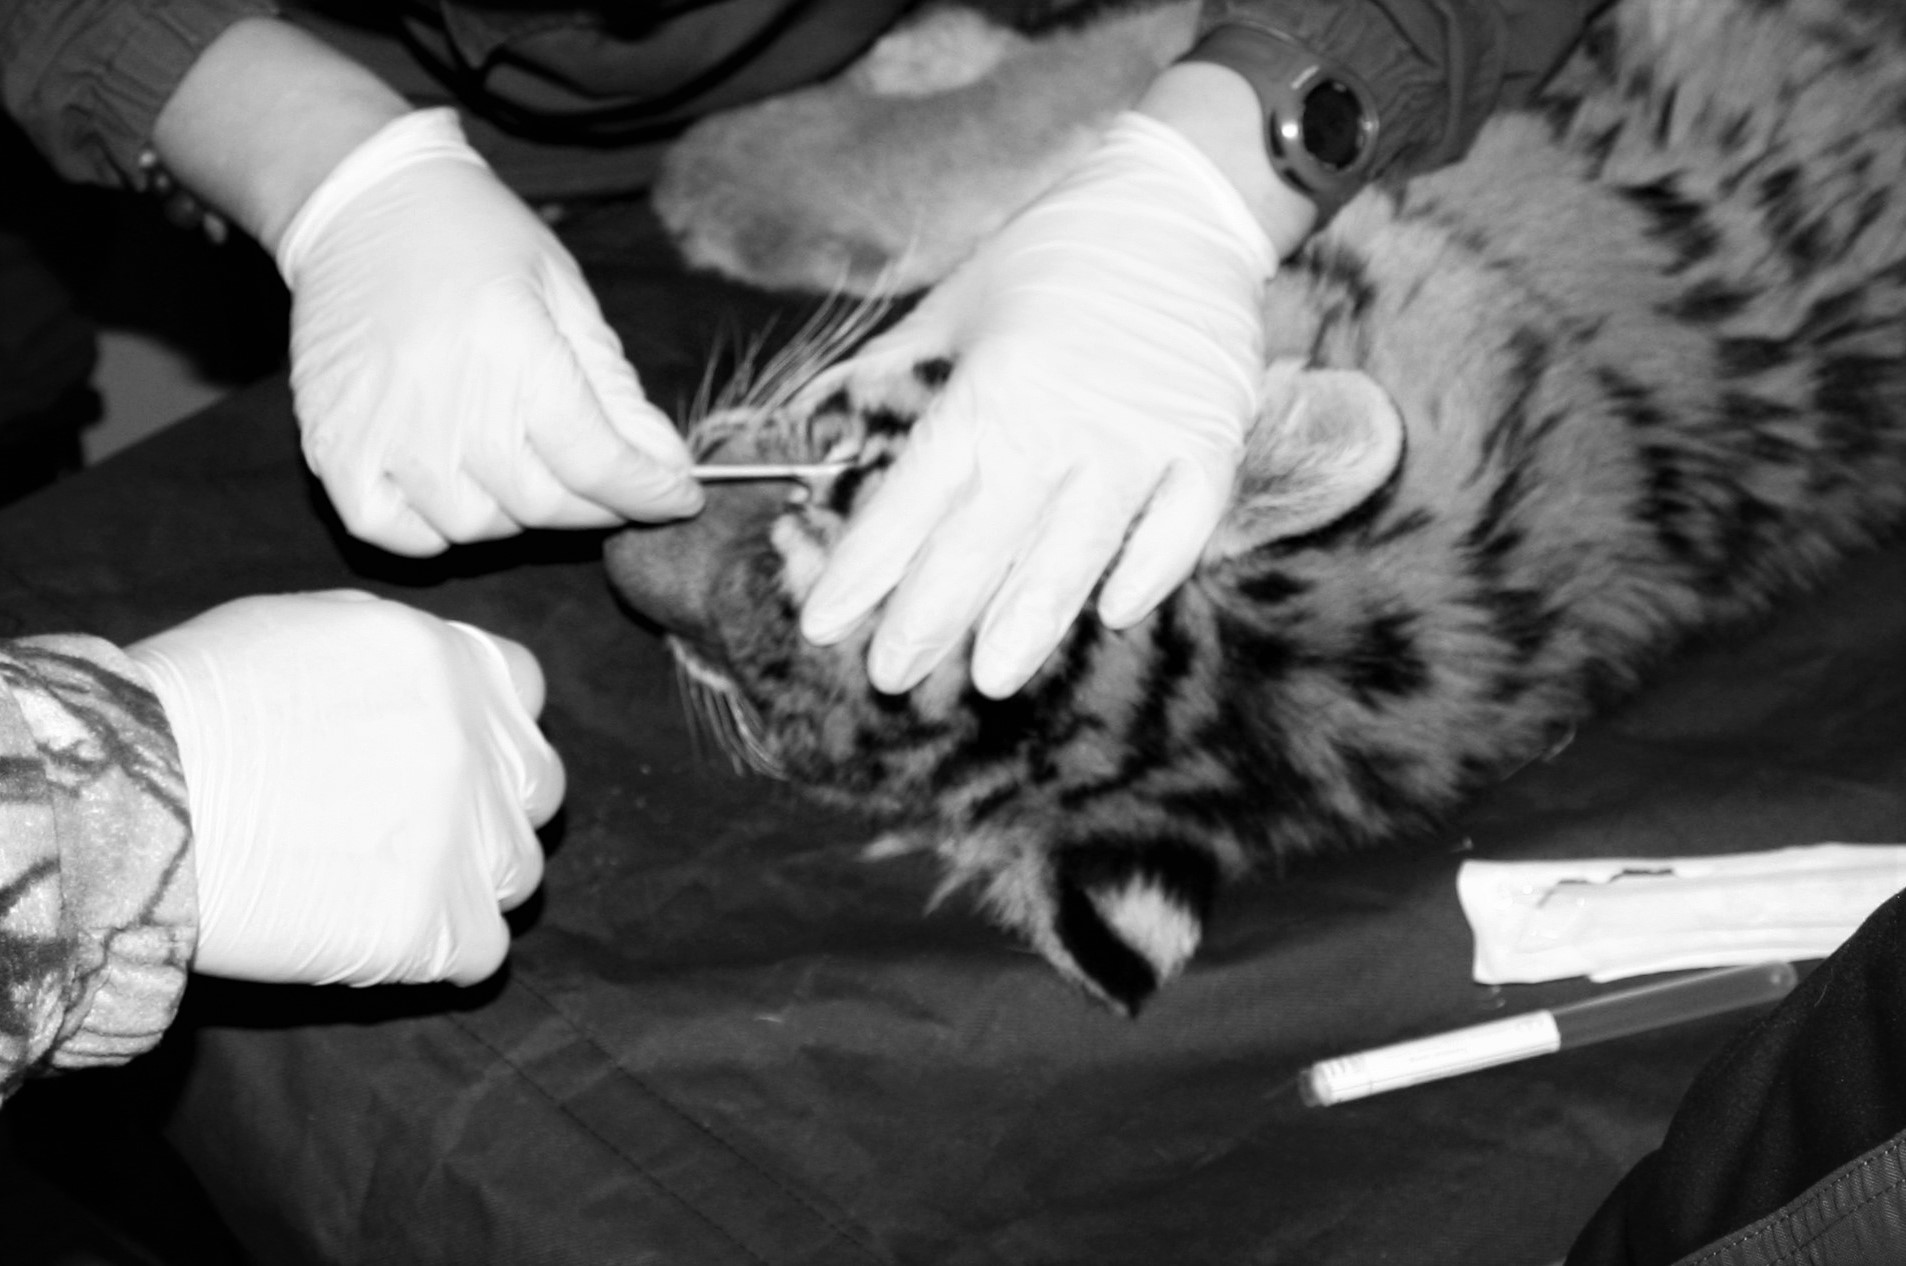 The tiger cub found in Primorye couldn't survive